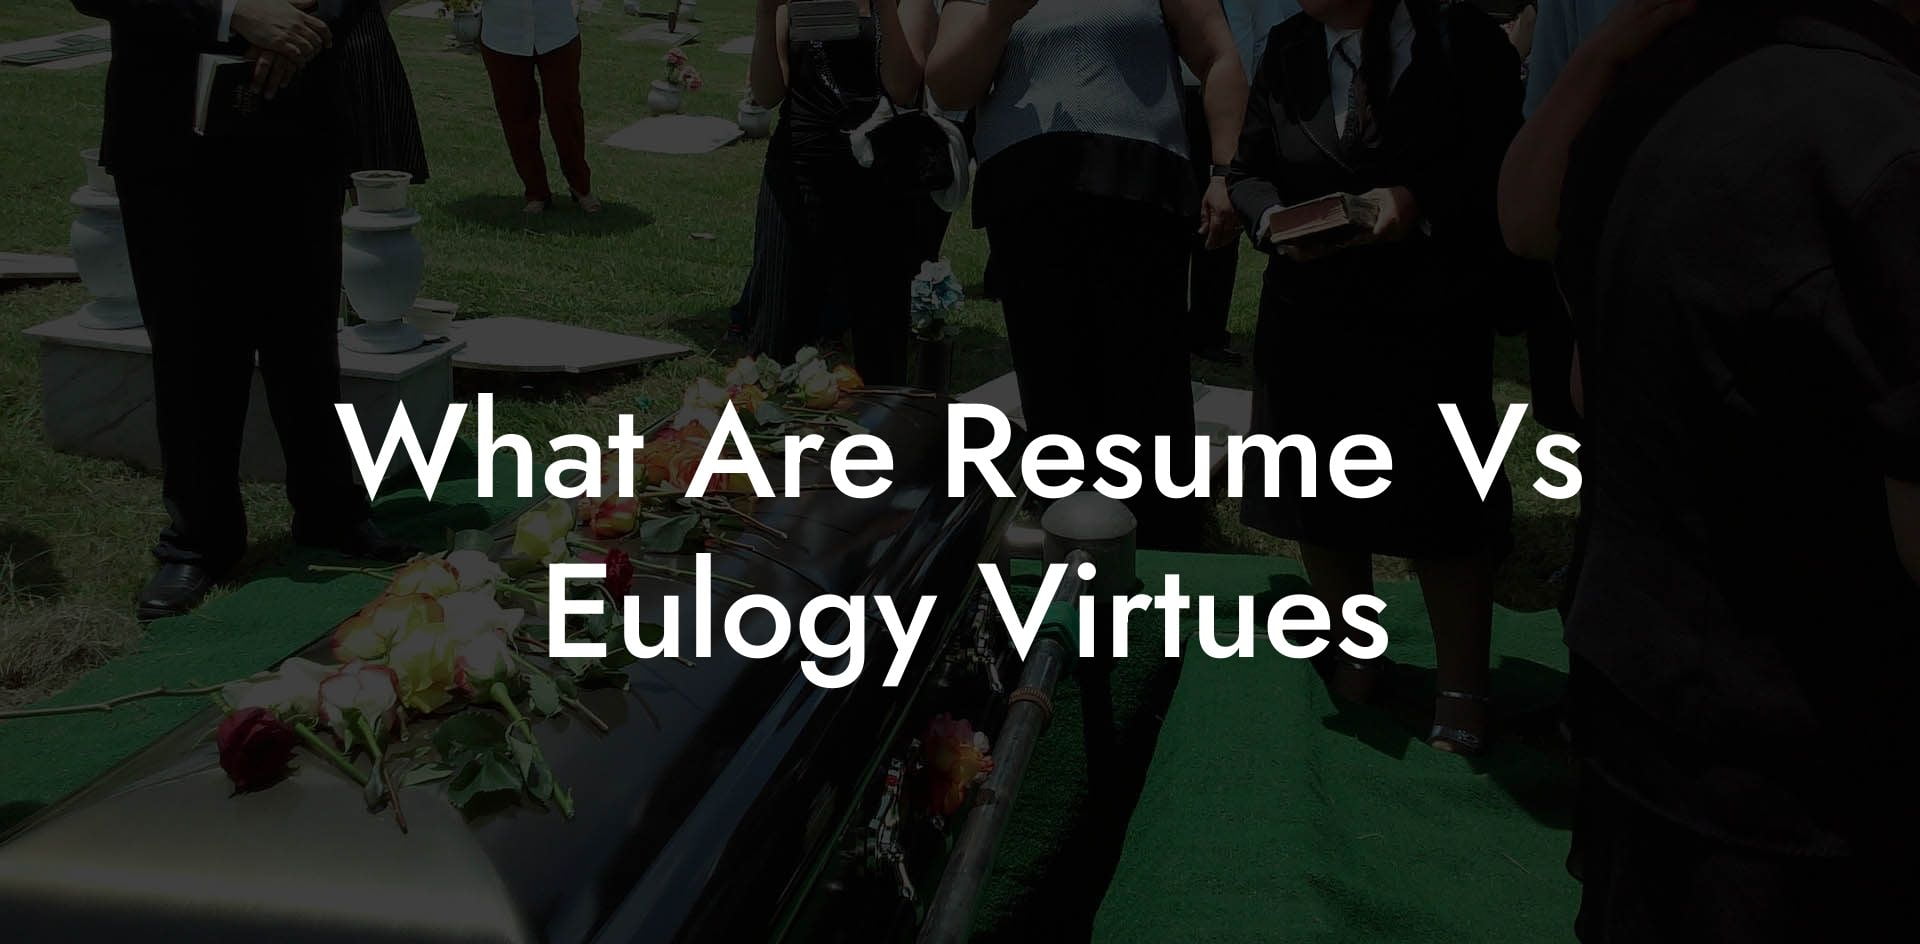 What Are Resume Vs Eulogy Virtues